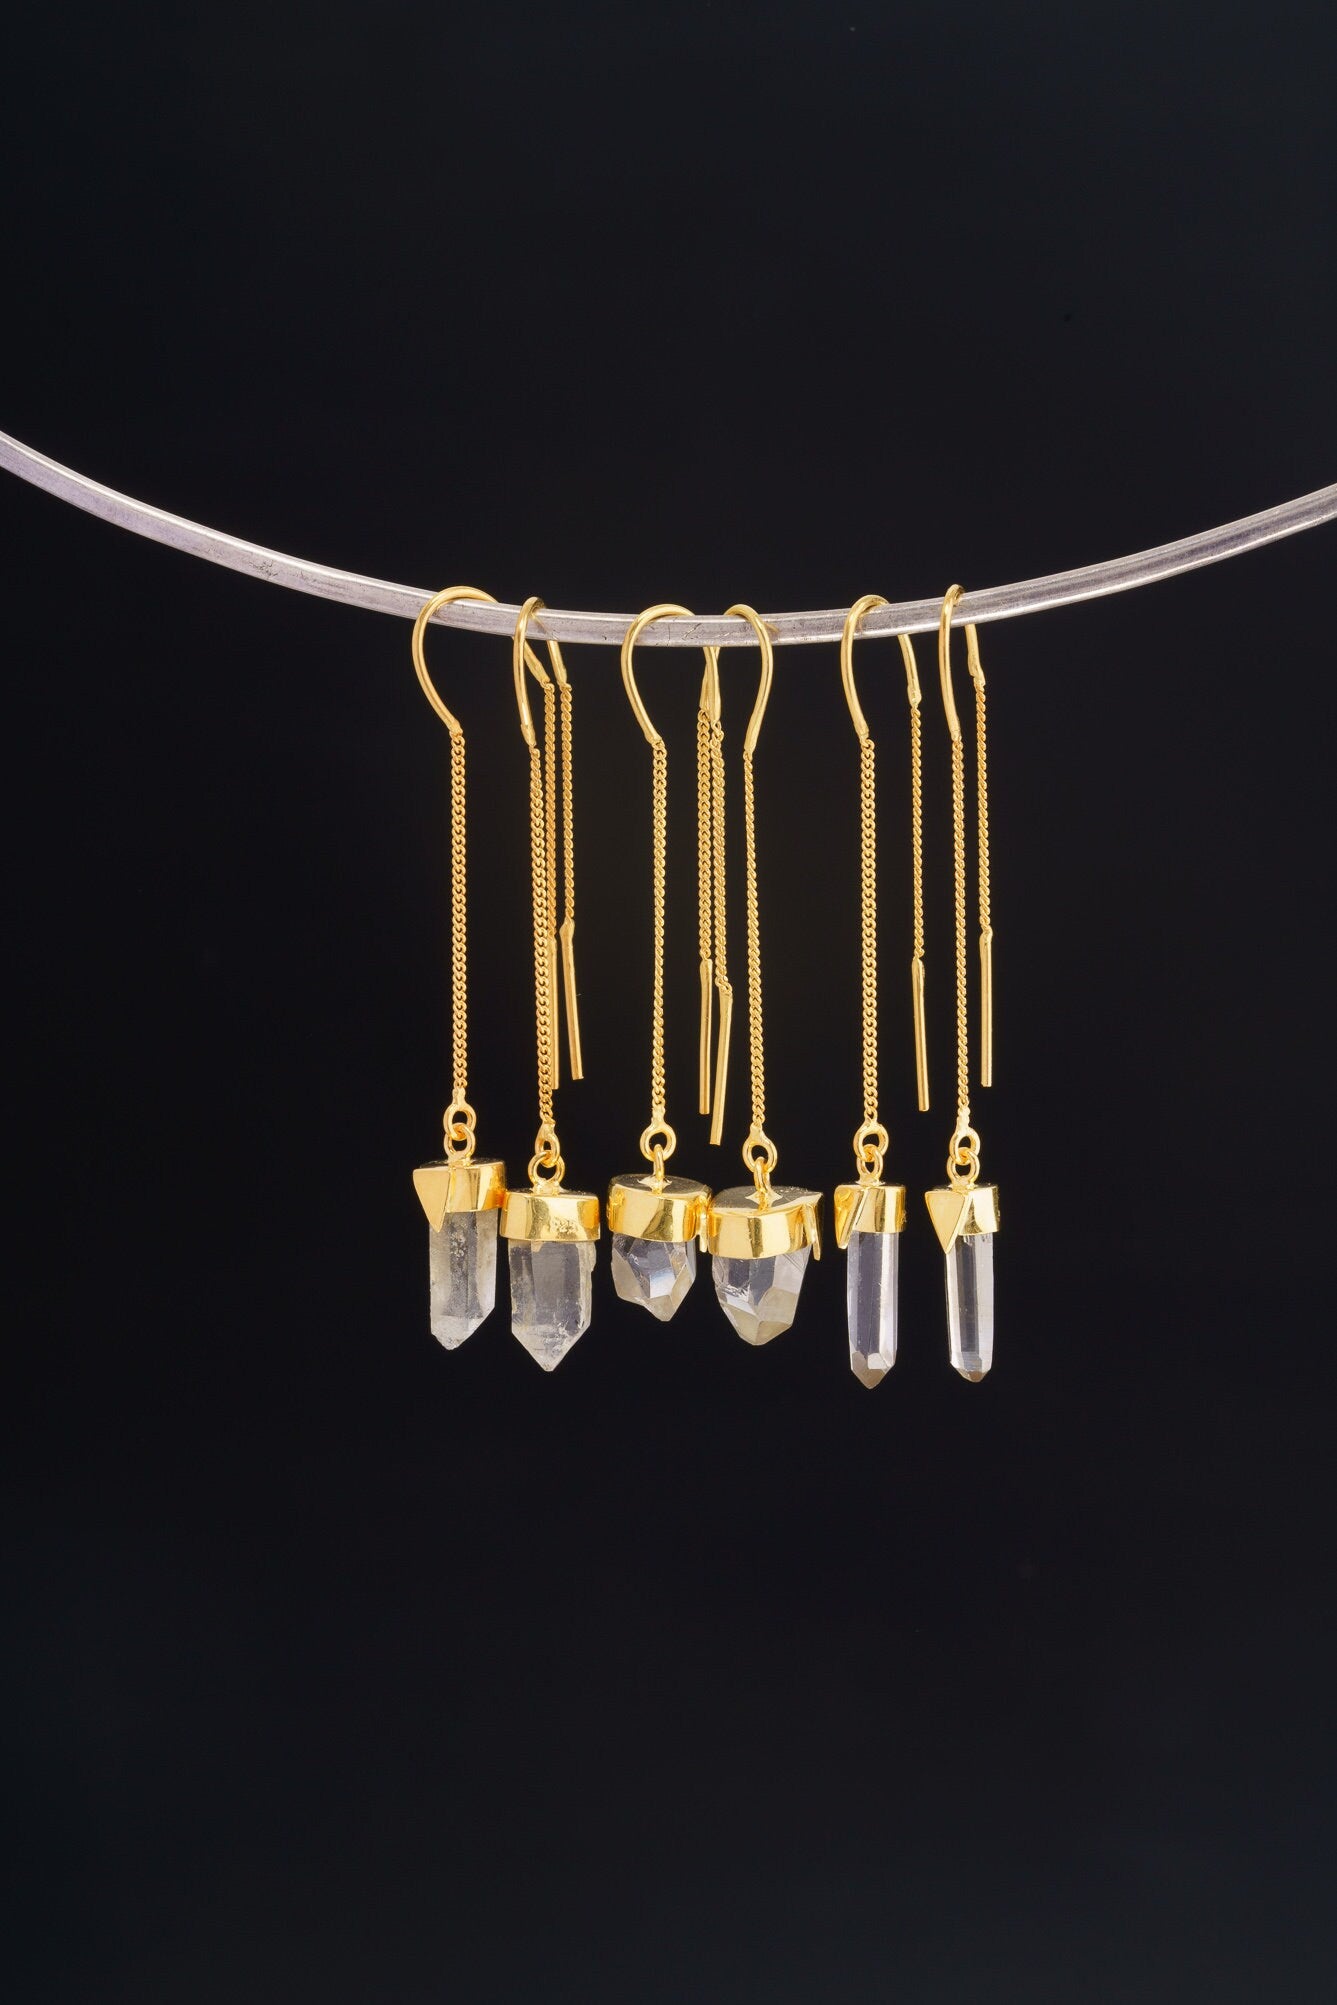 Himalayan Quartz Point Pair - Gold Plated Sterling Silver - Dangle Thread Hook Earring